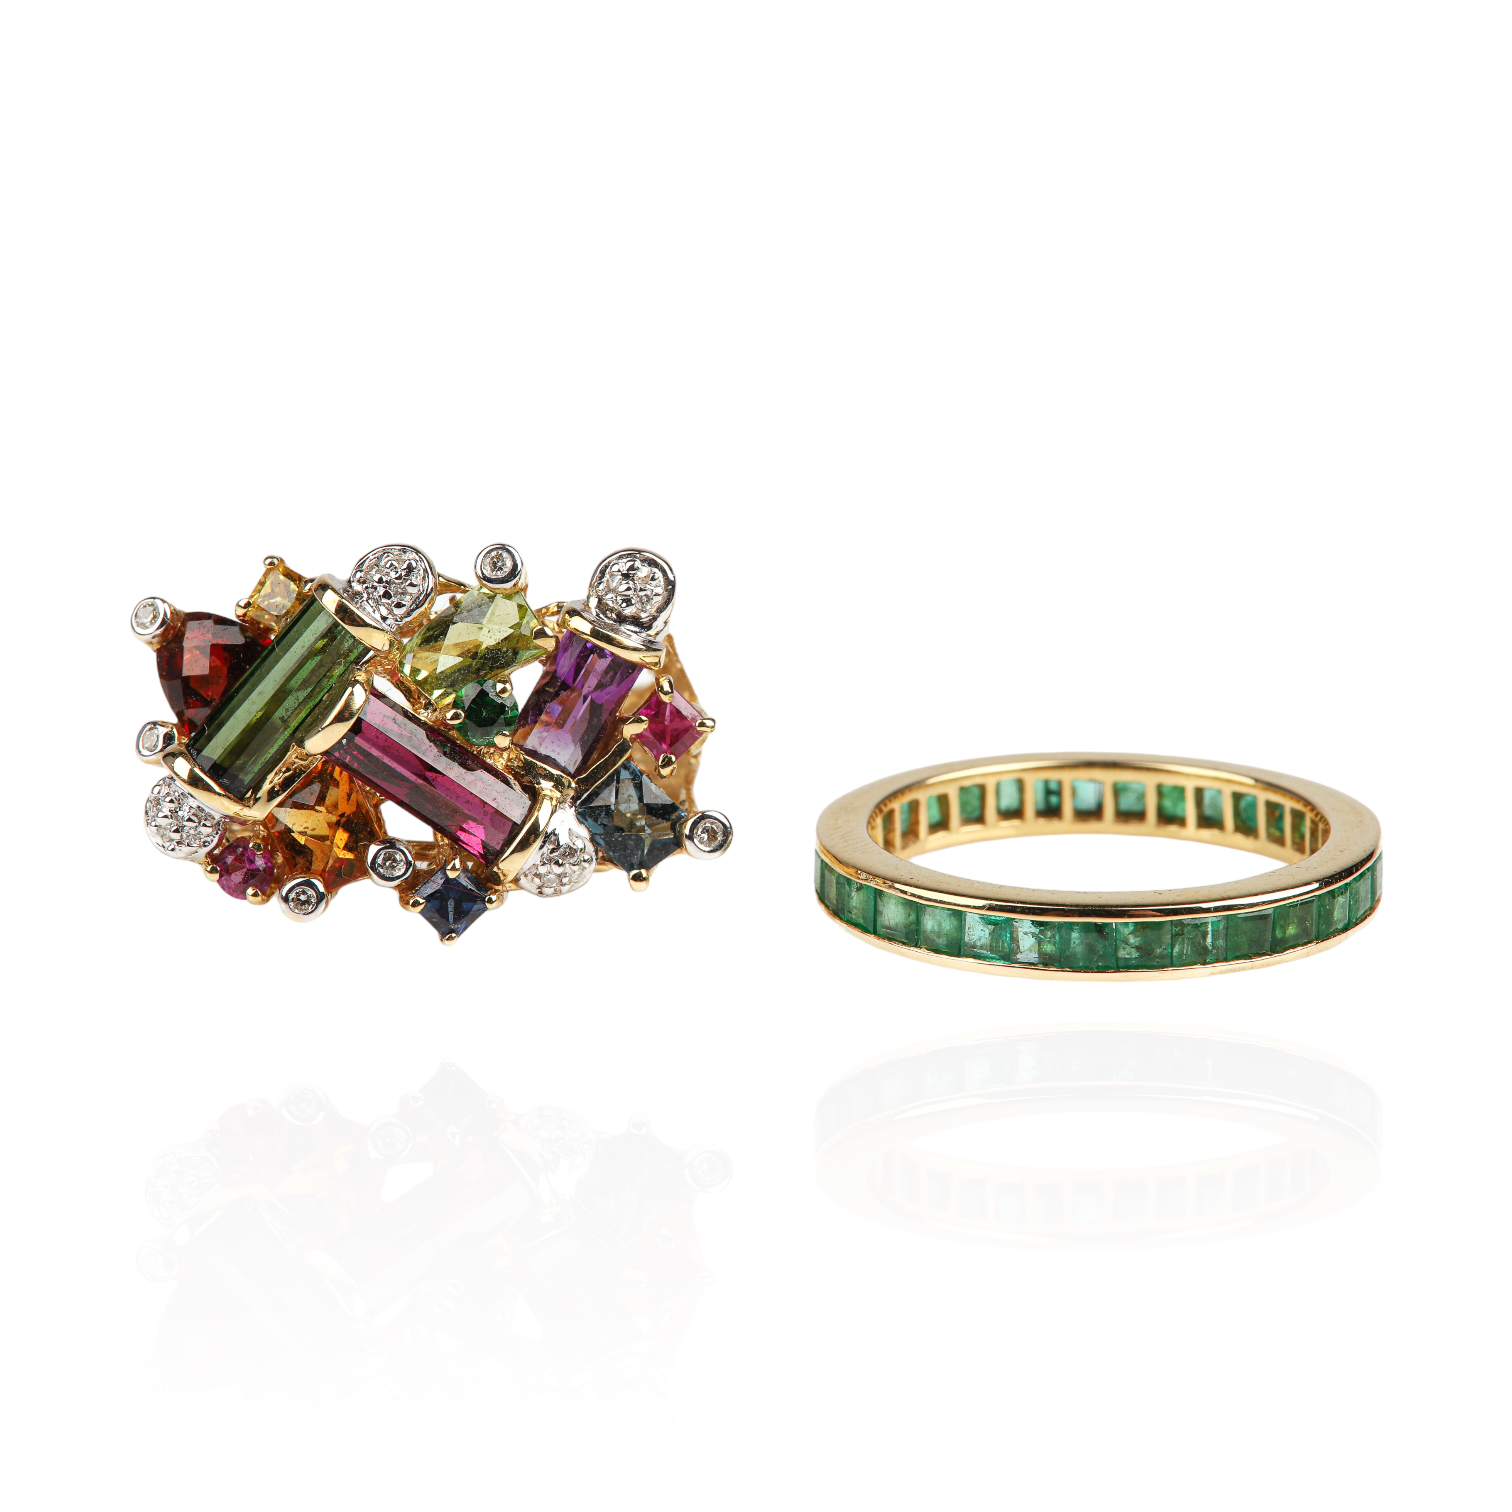 (2) 18K Yellow gold emerald and